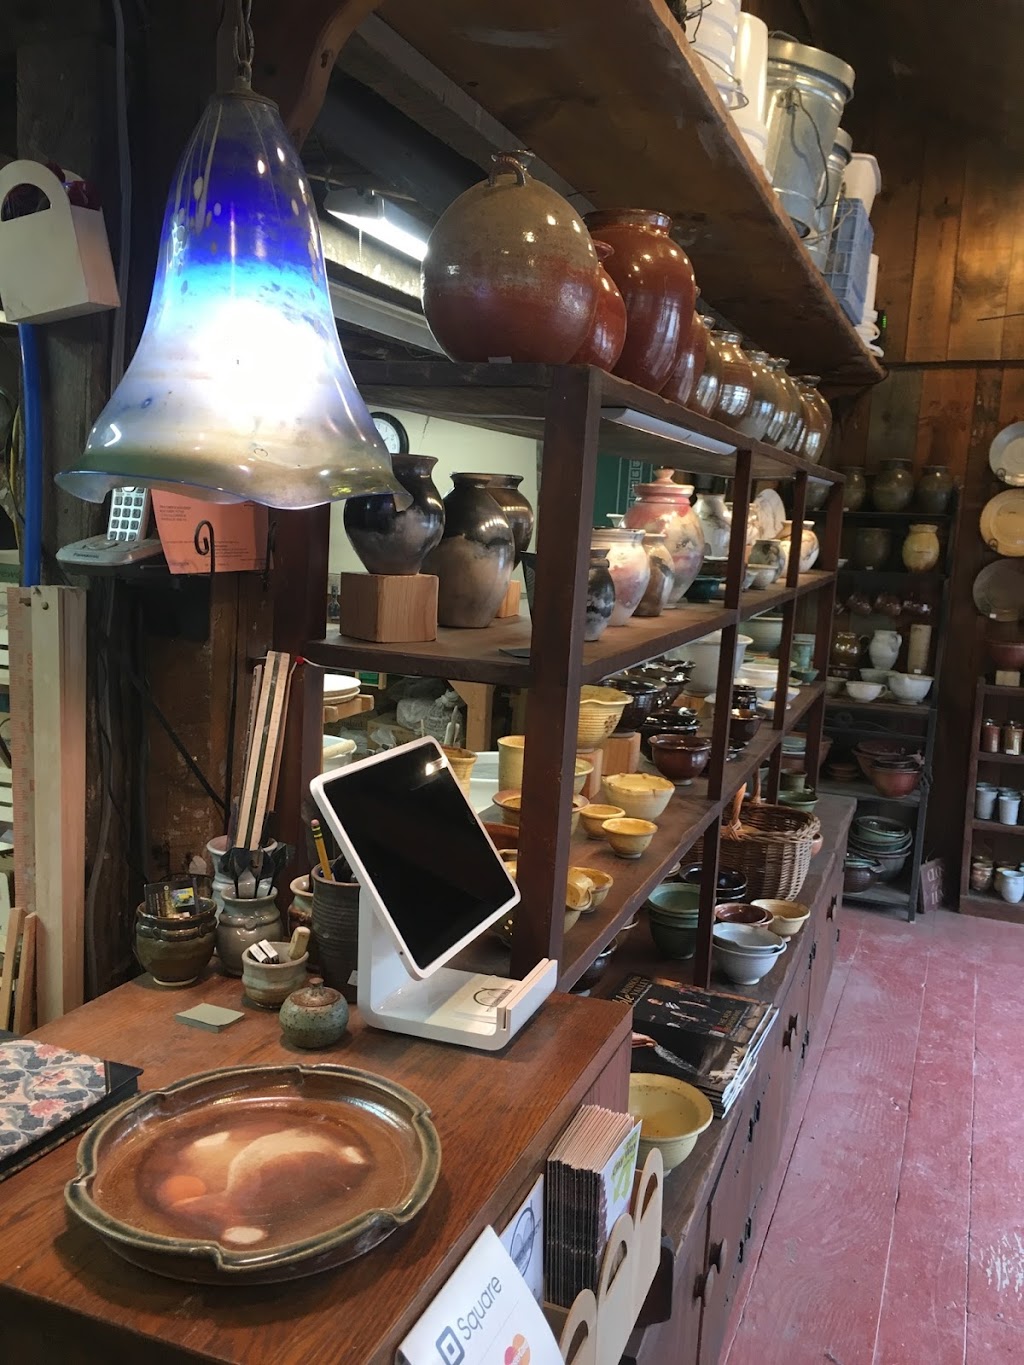 Montgomery Pottery | 17 Dog Tail Corners Rd, Wingdale, NY 12594 | Phone: (845) 832-2001